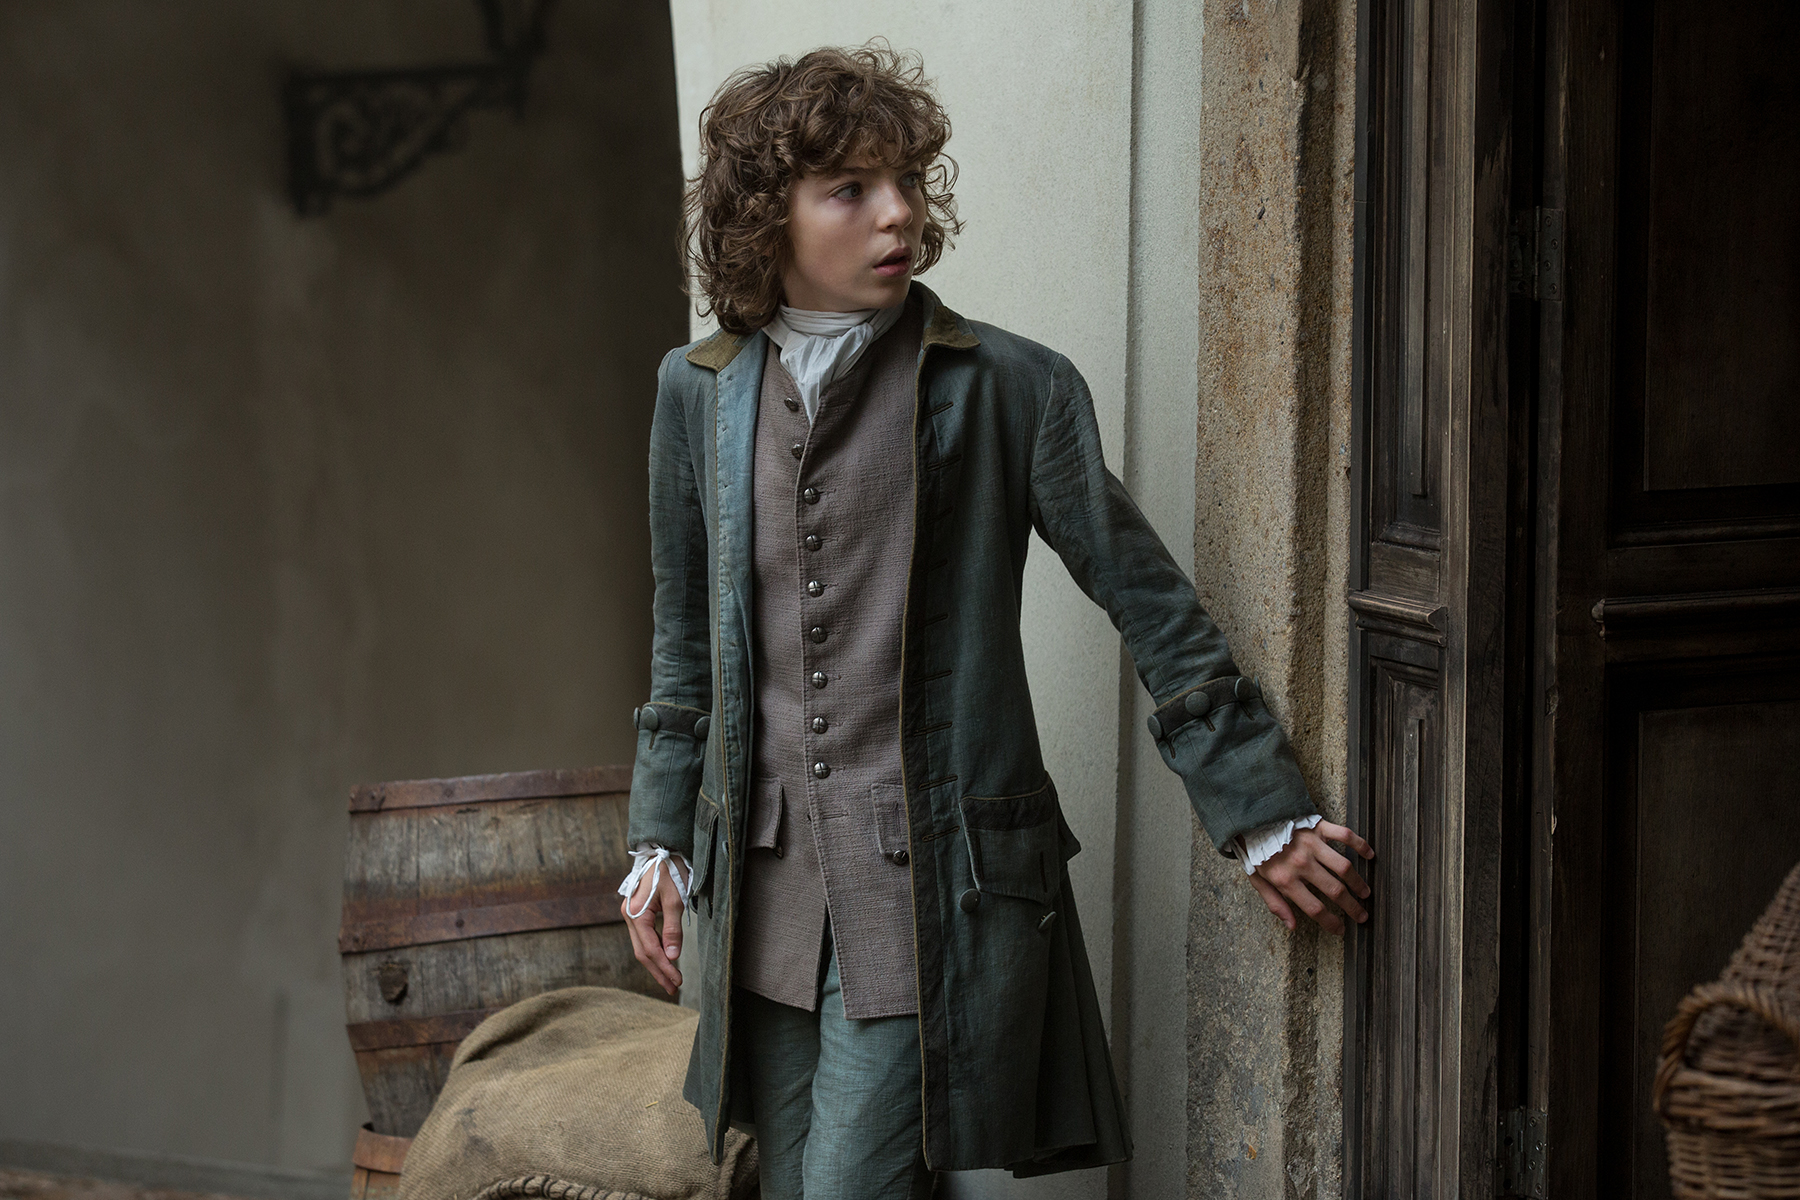 Look at this adorable little scamp! (Romann Berrux as Fergus)